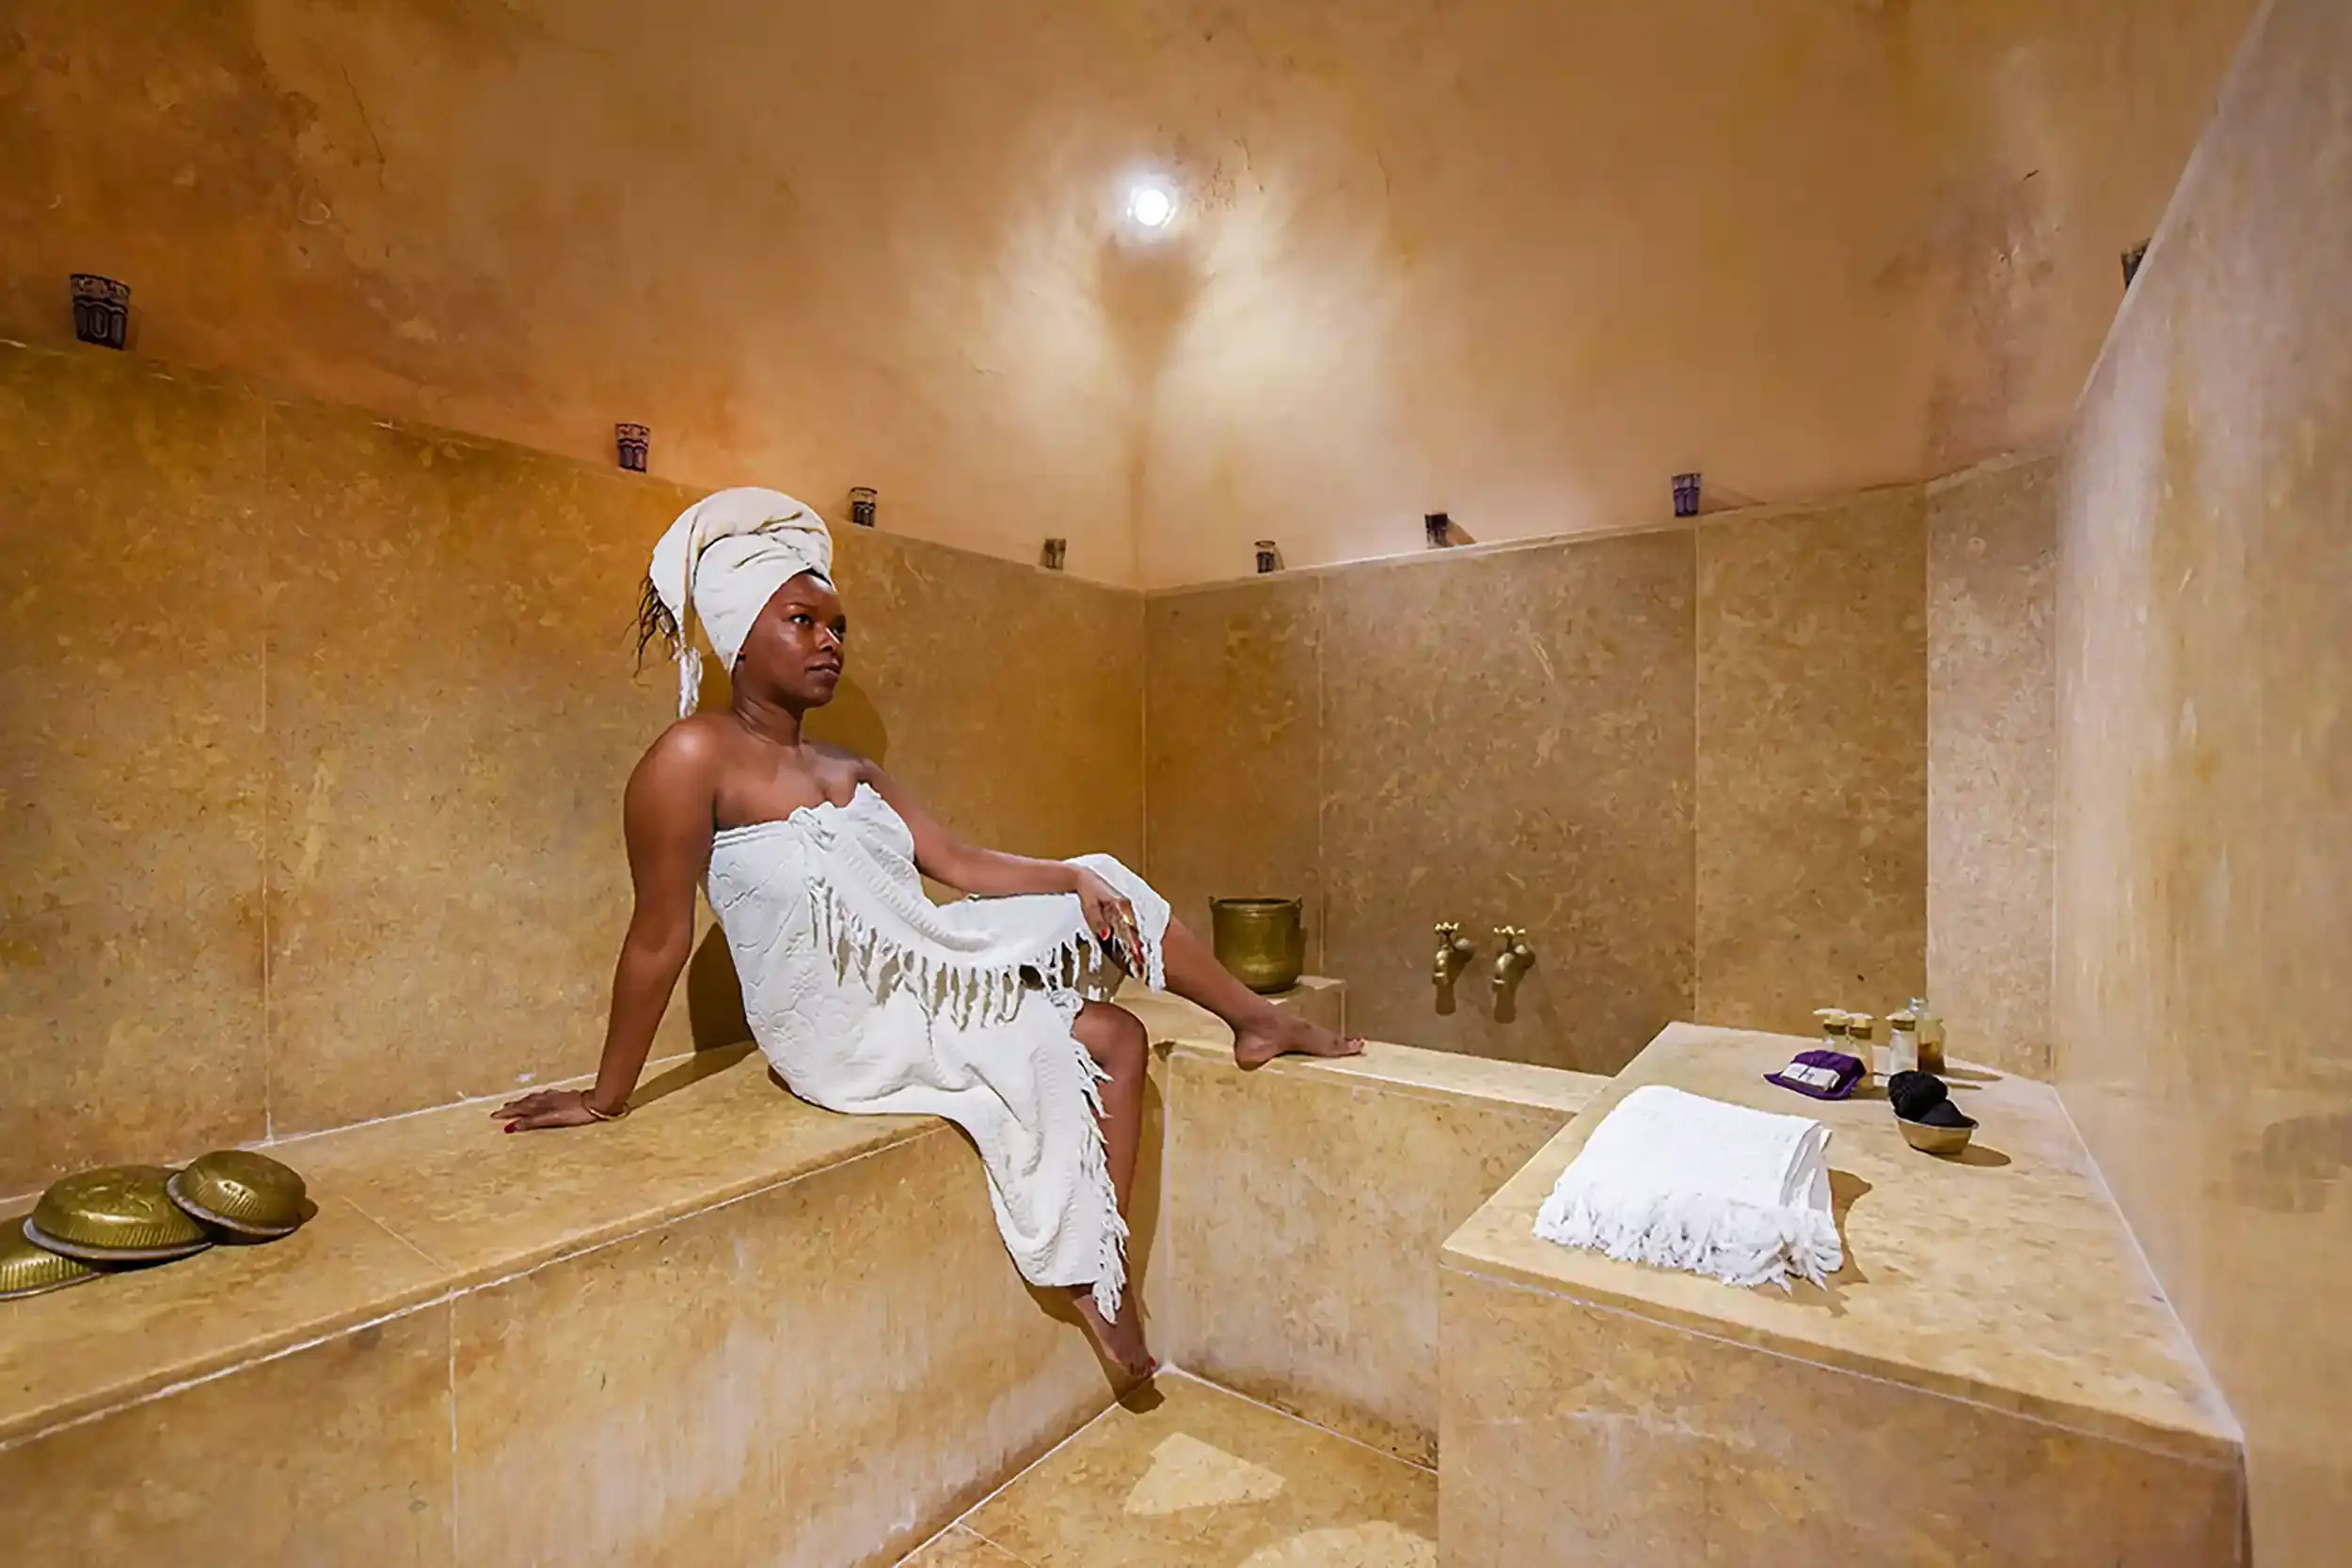 The hammam of Riad Houdou, for a moment of relaxation and rejuvenation. Discover our other services as well: massages, excursions, and more.